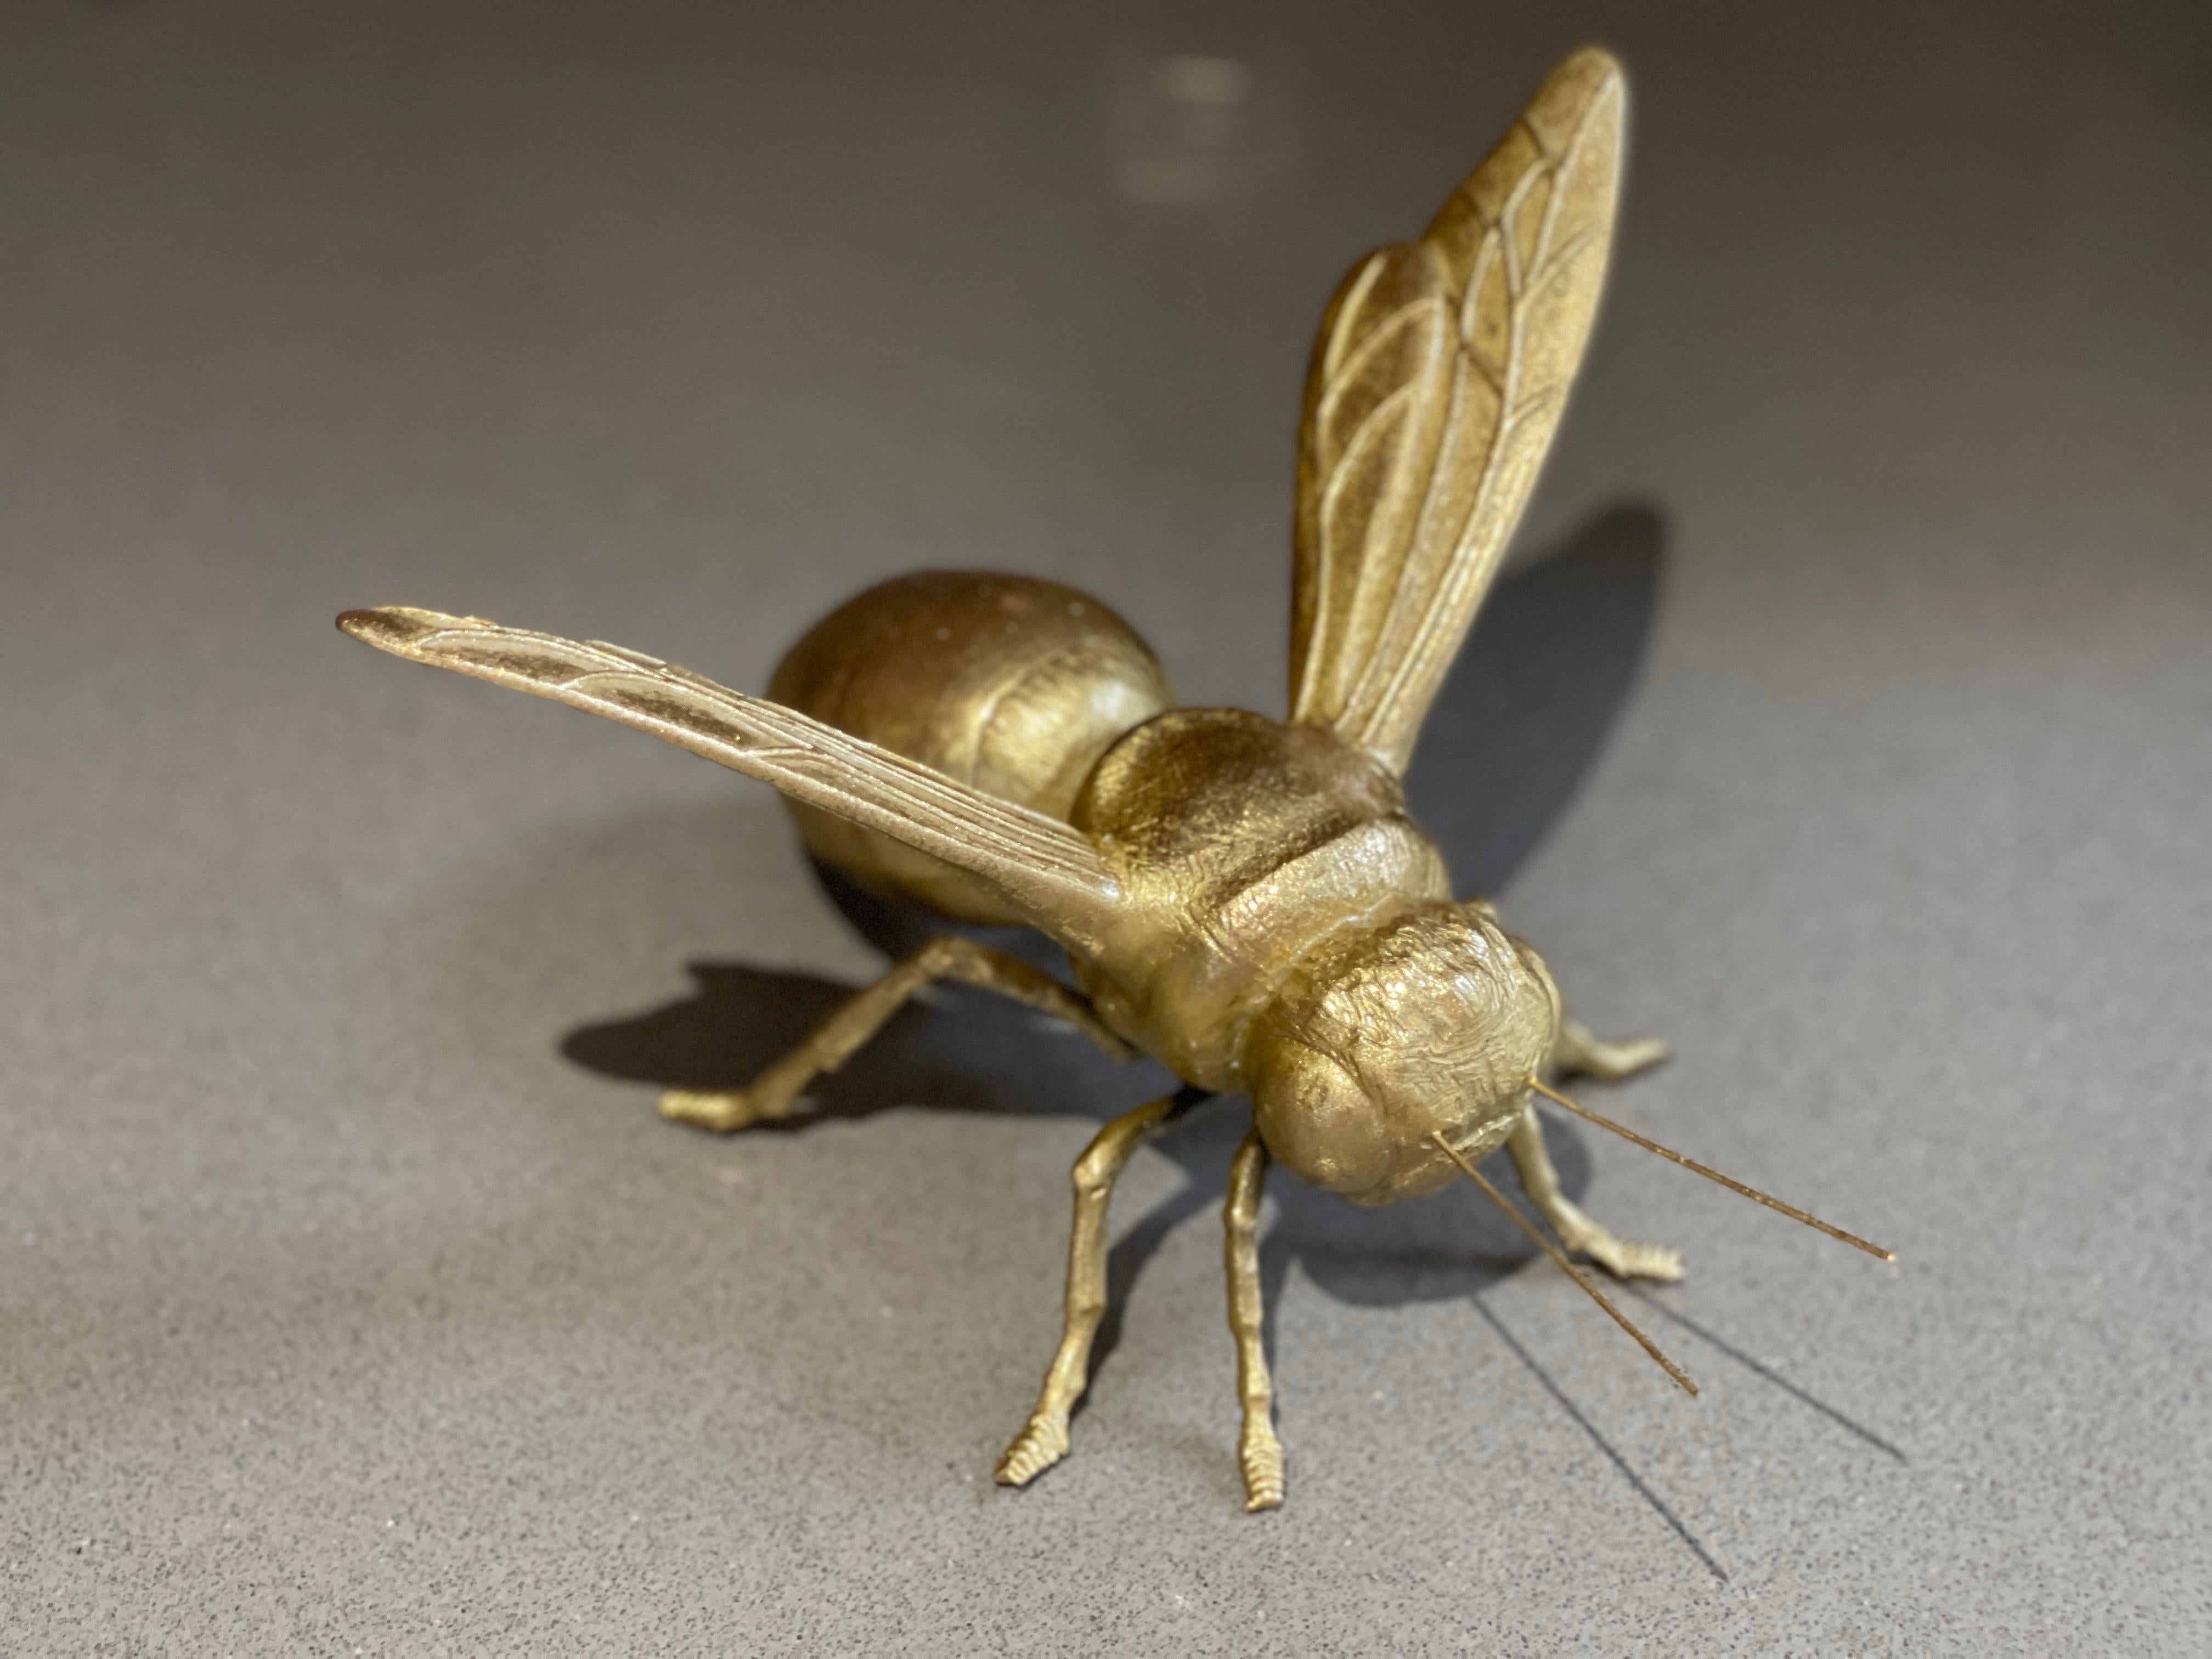 Vintage Decorative Gold Bee Ornament Bumble Bee Sculpture LUXURY ORNAMENT GOLD  In Excellent Condition For Sale In Hampshire, GB